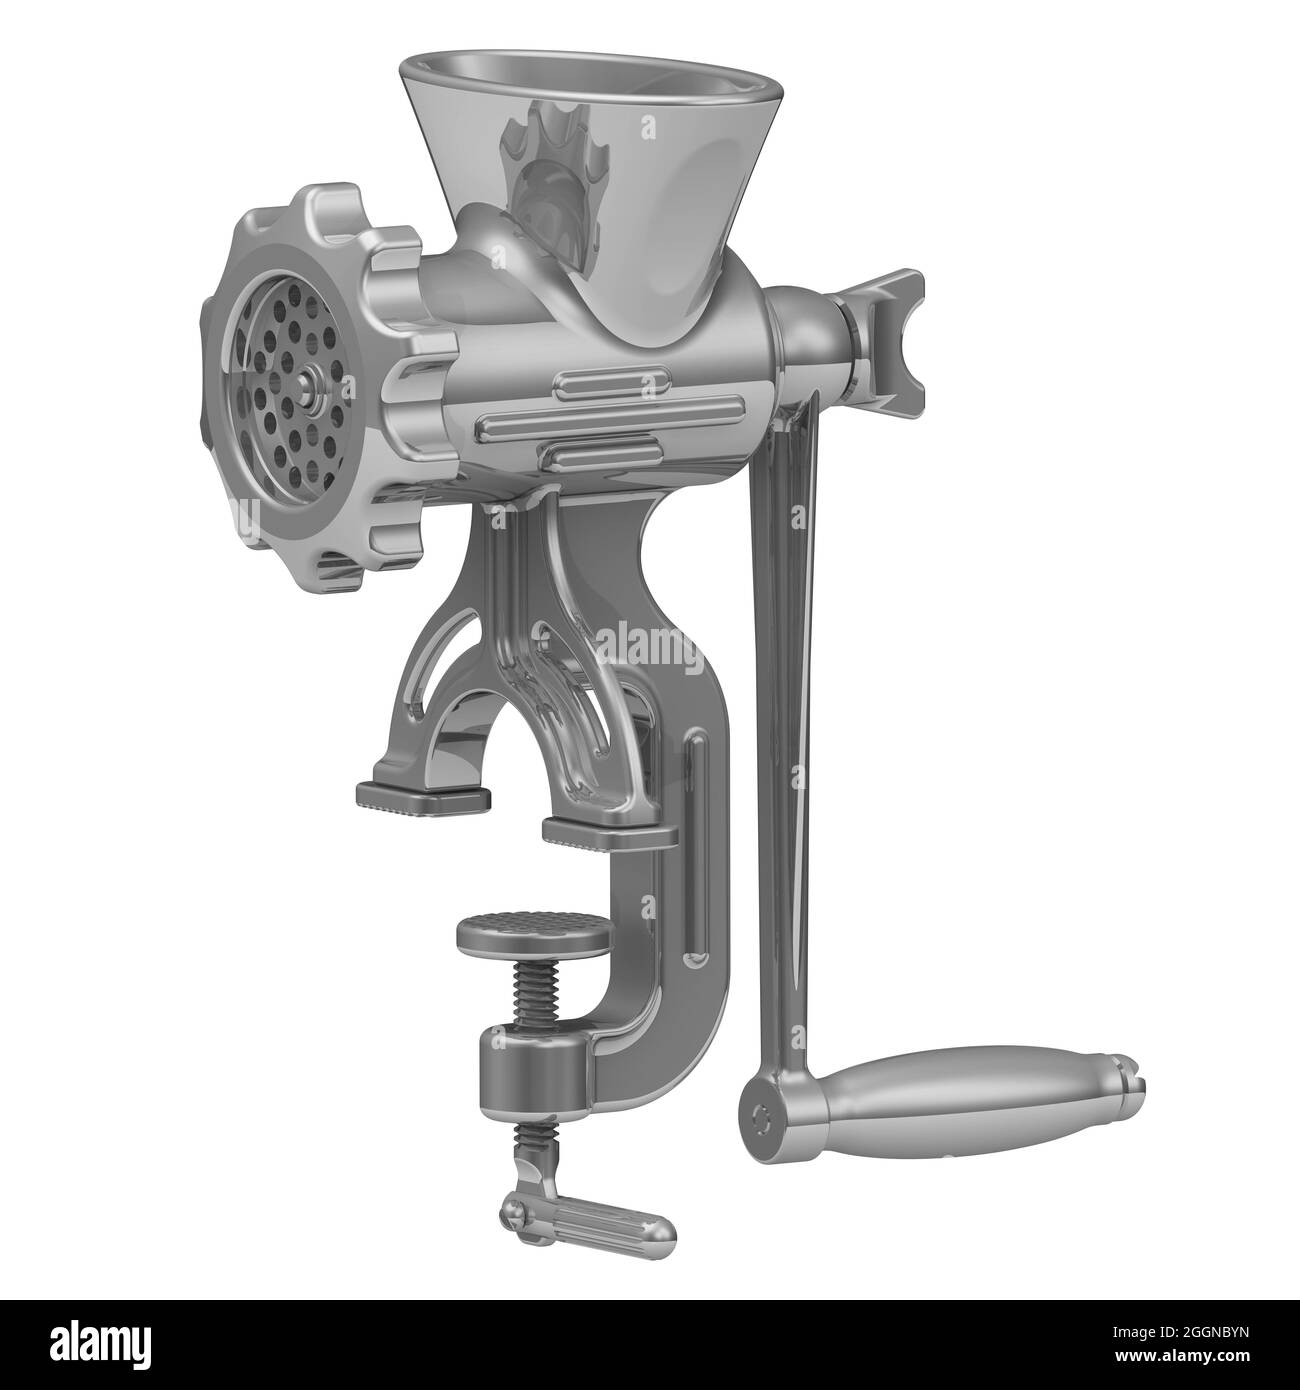 https://c8.alamy.com/comp/2GGNBYN/manual-meat-grinder-the-old-manual-meat-grinder-isolated-on-white-background-3d-illustration-2GGNBYN.jpg